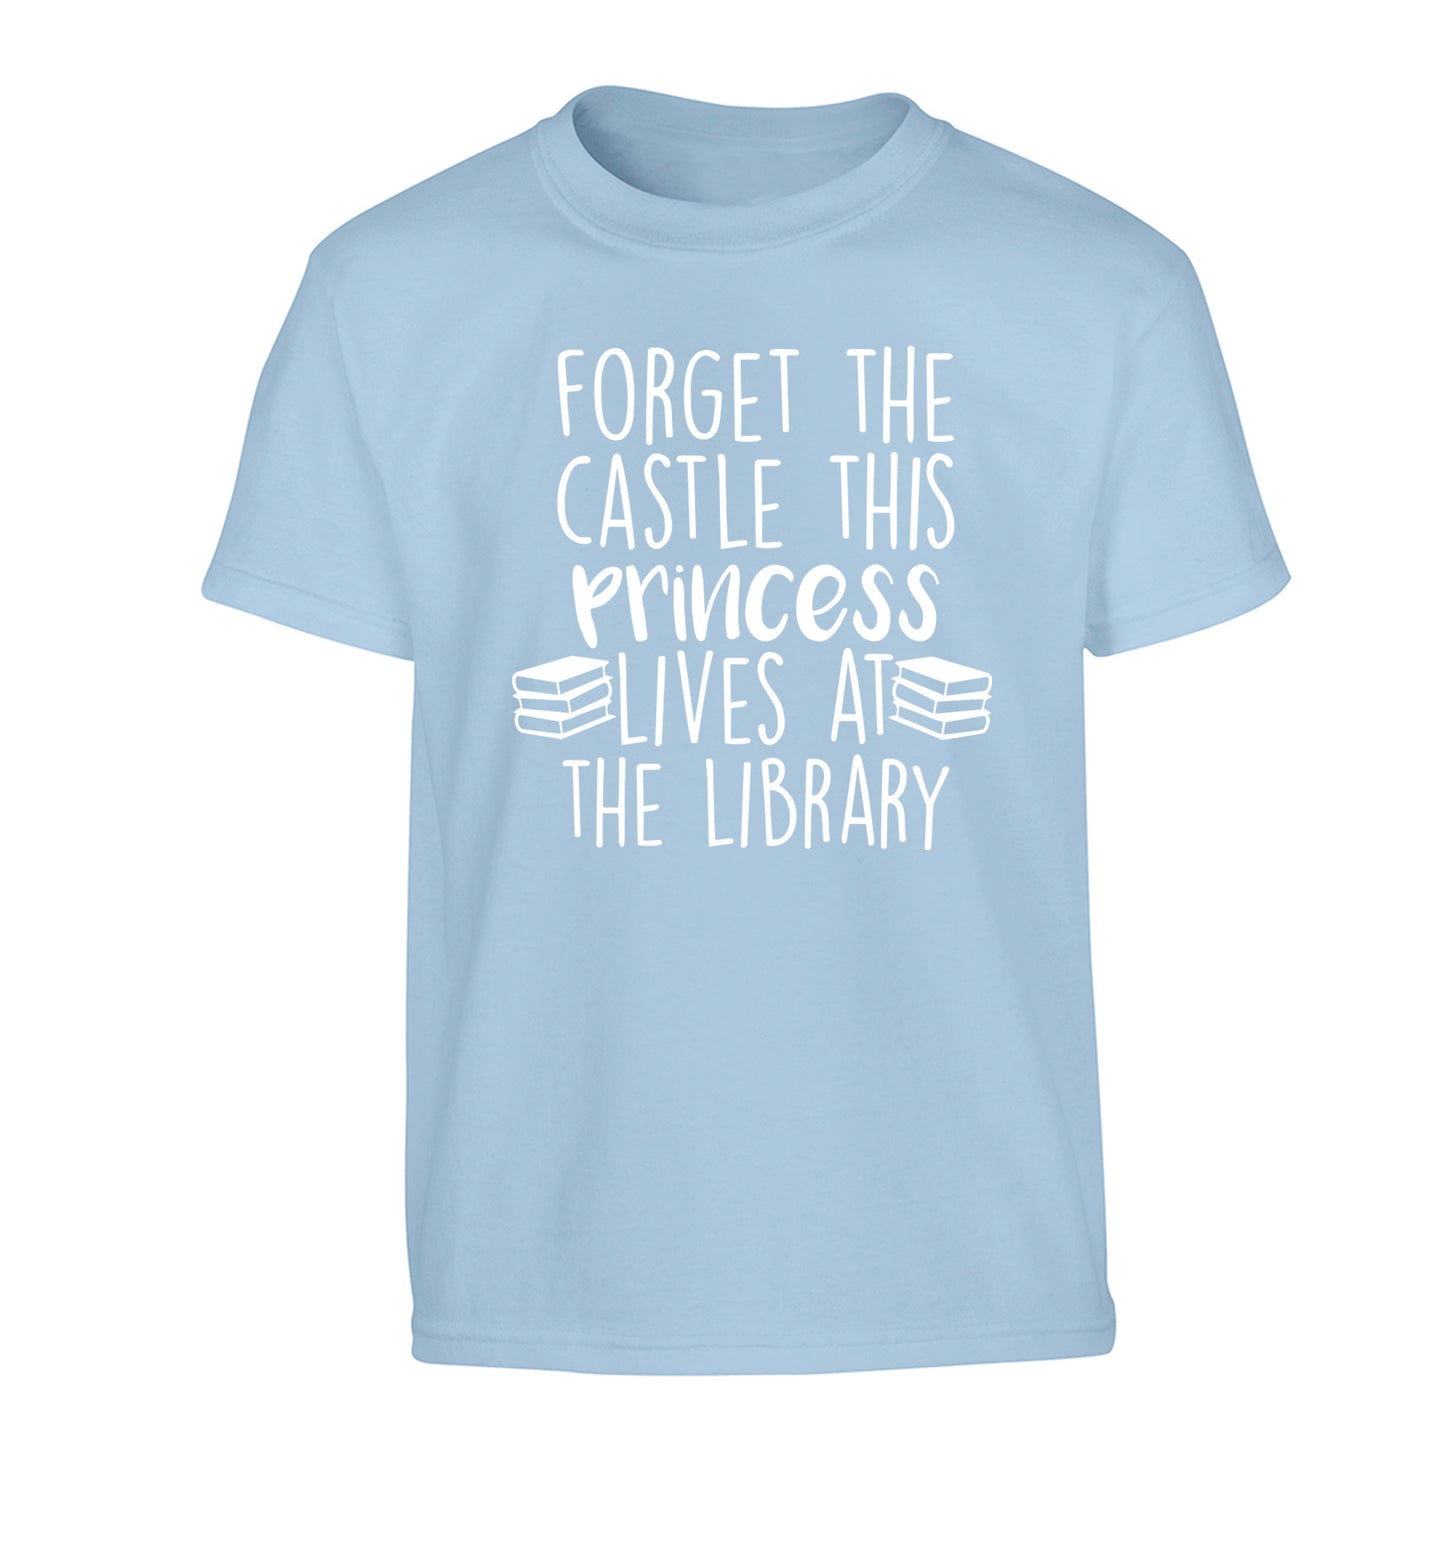 Forget the castle this princess lives at the library Children's light blue Tshirt 12-14 Years